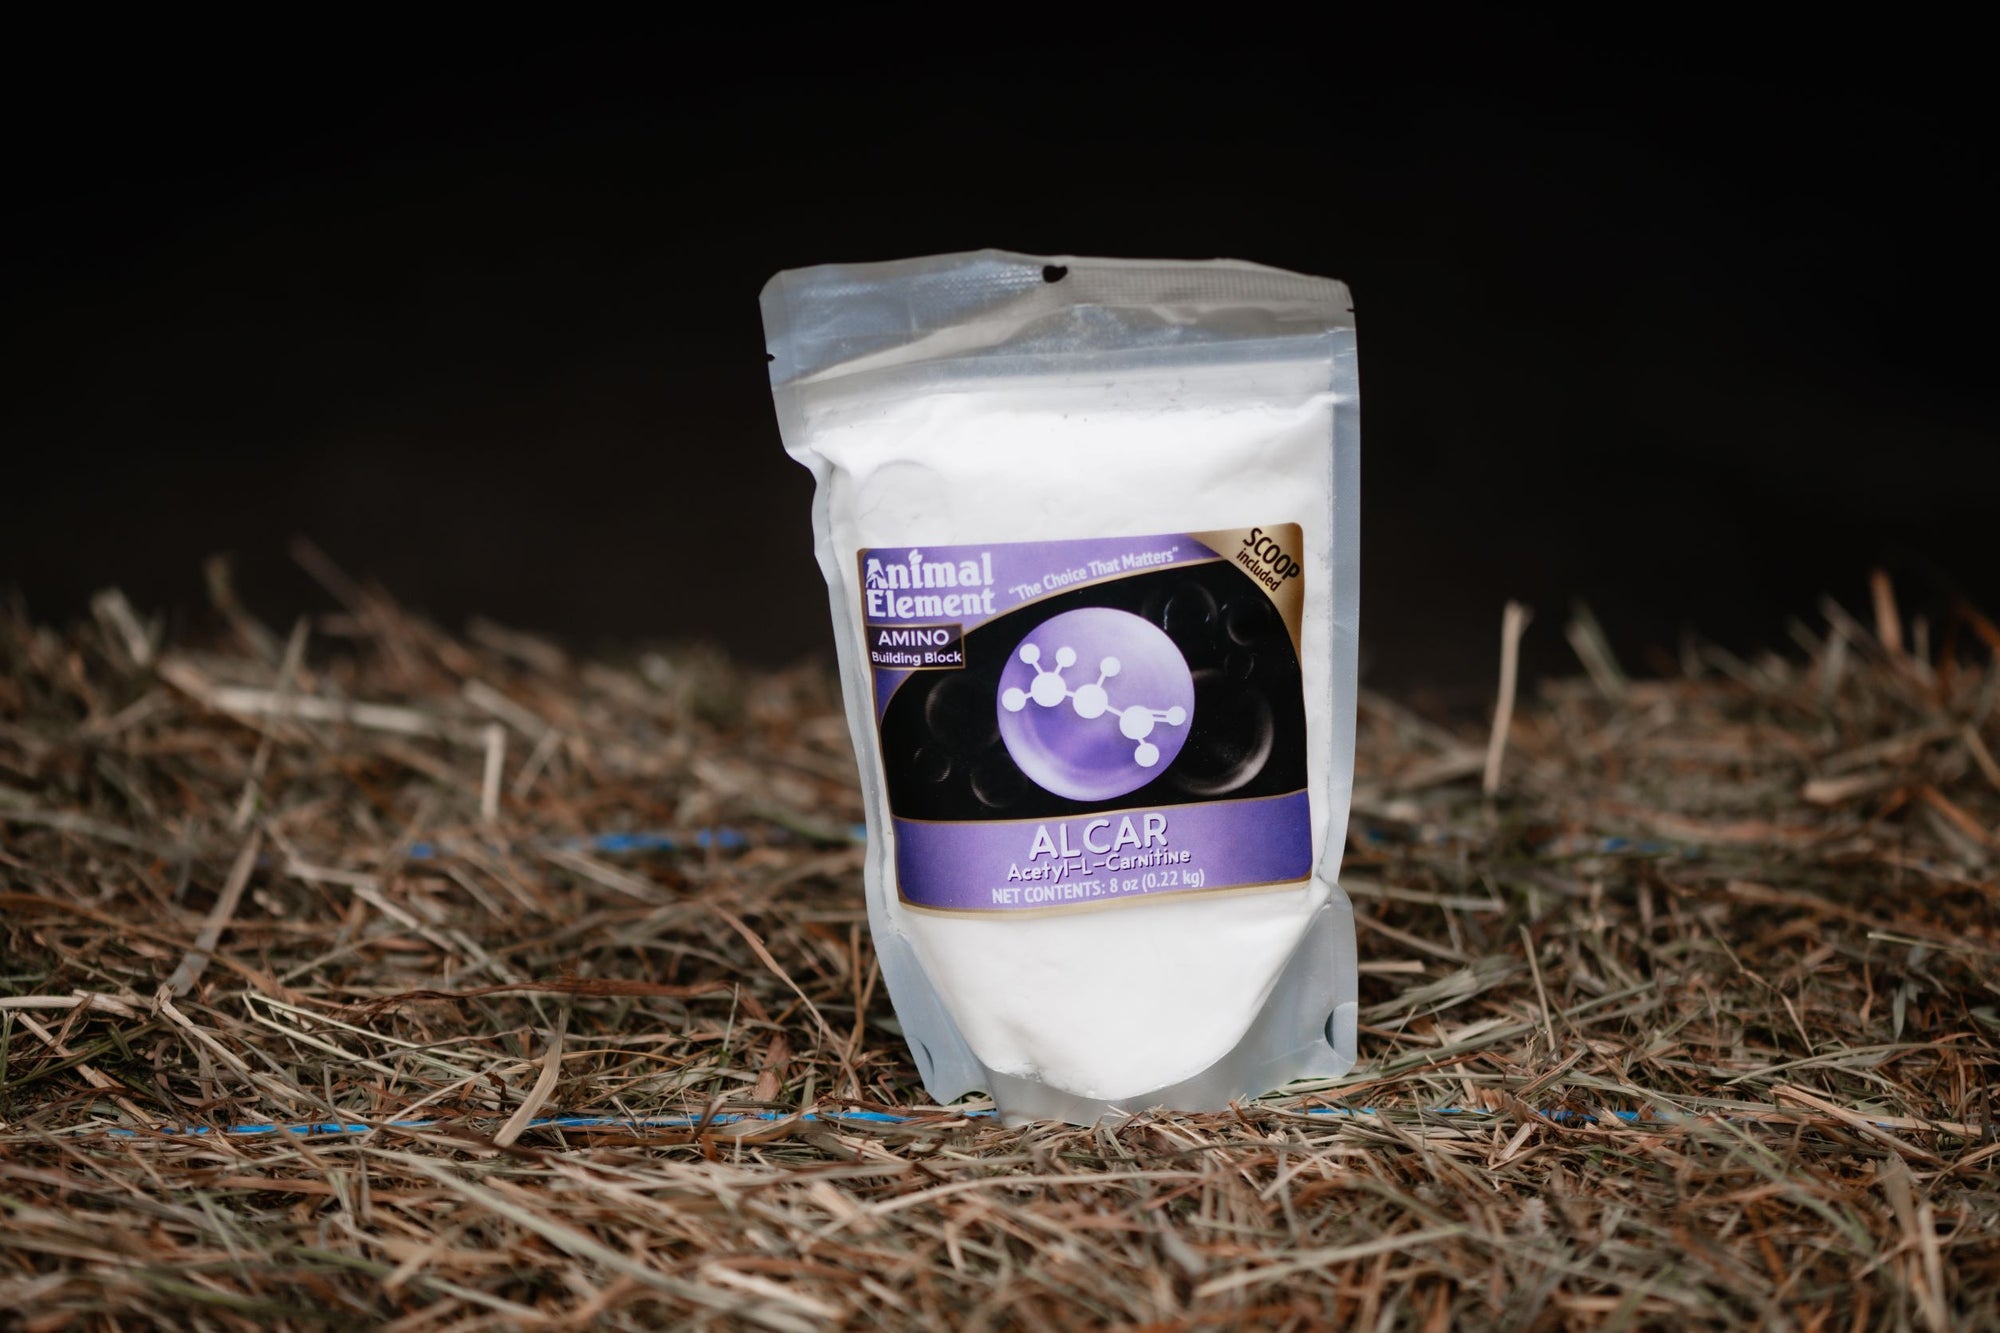 AH Performance – Special FX Equine Performance Products